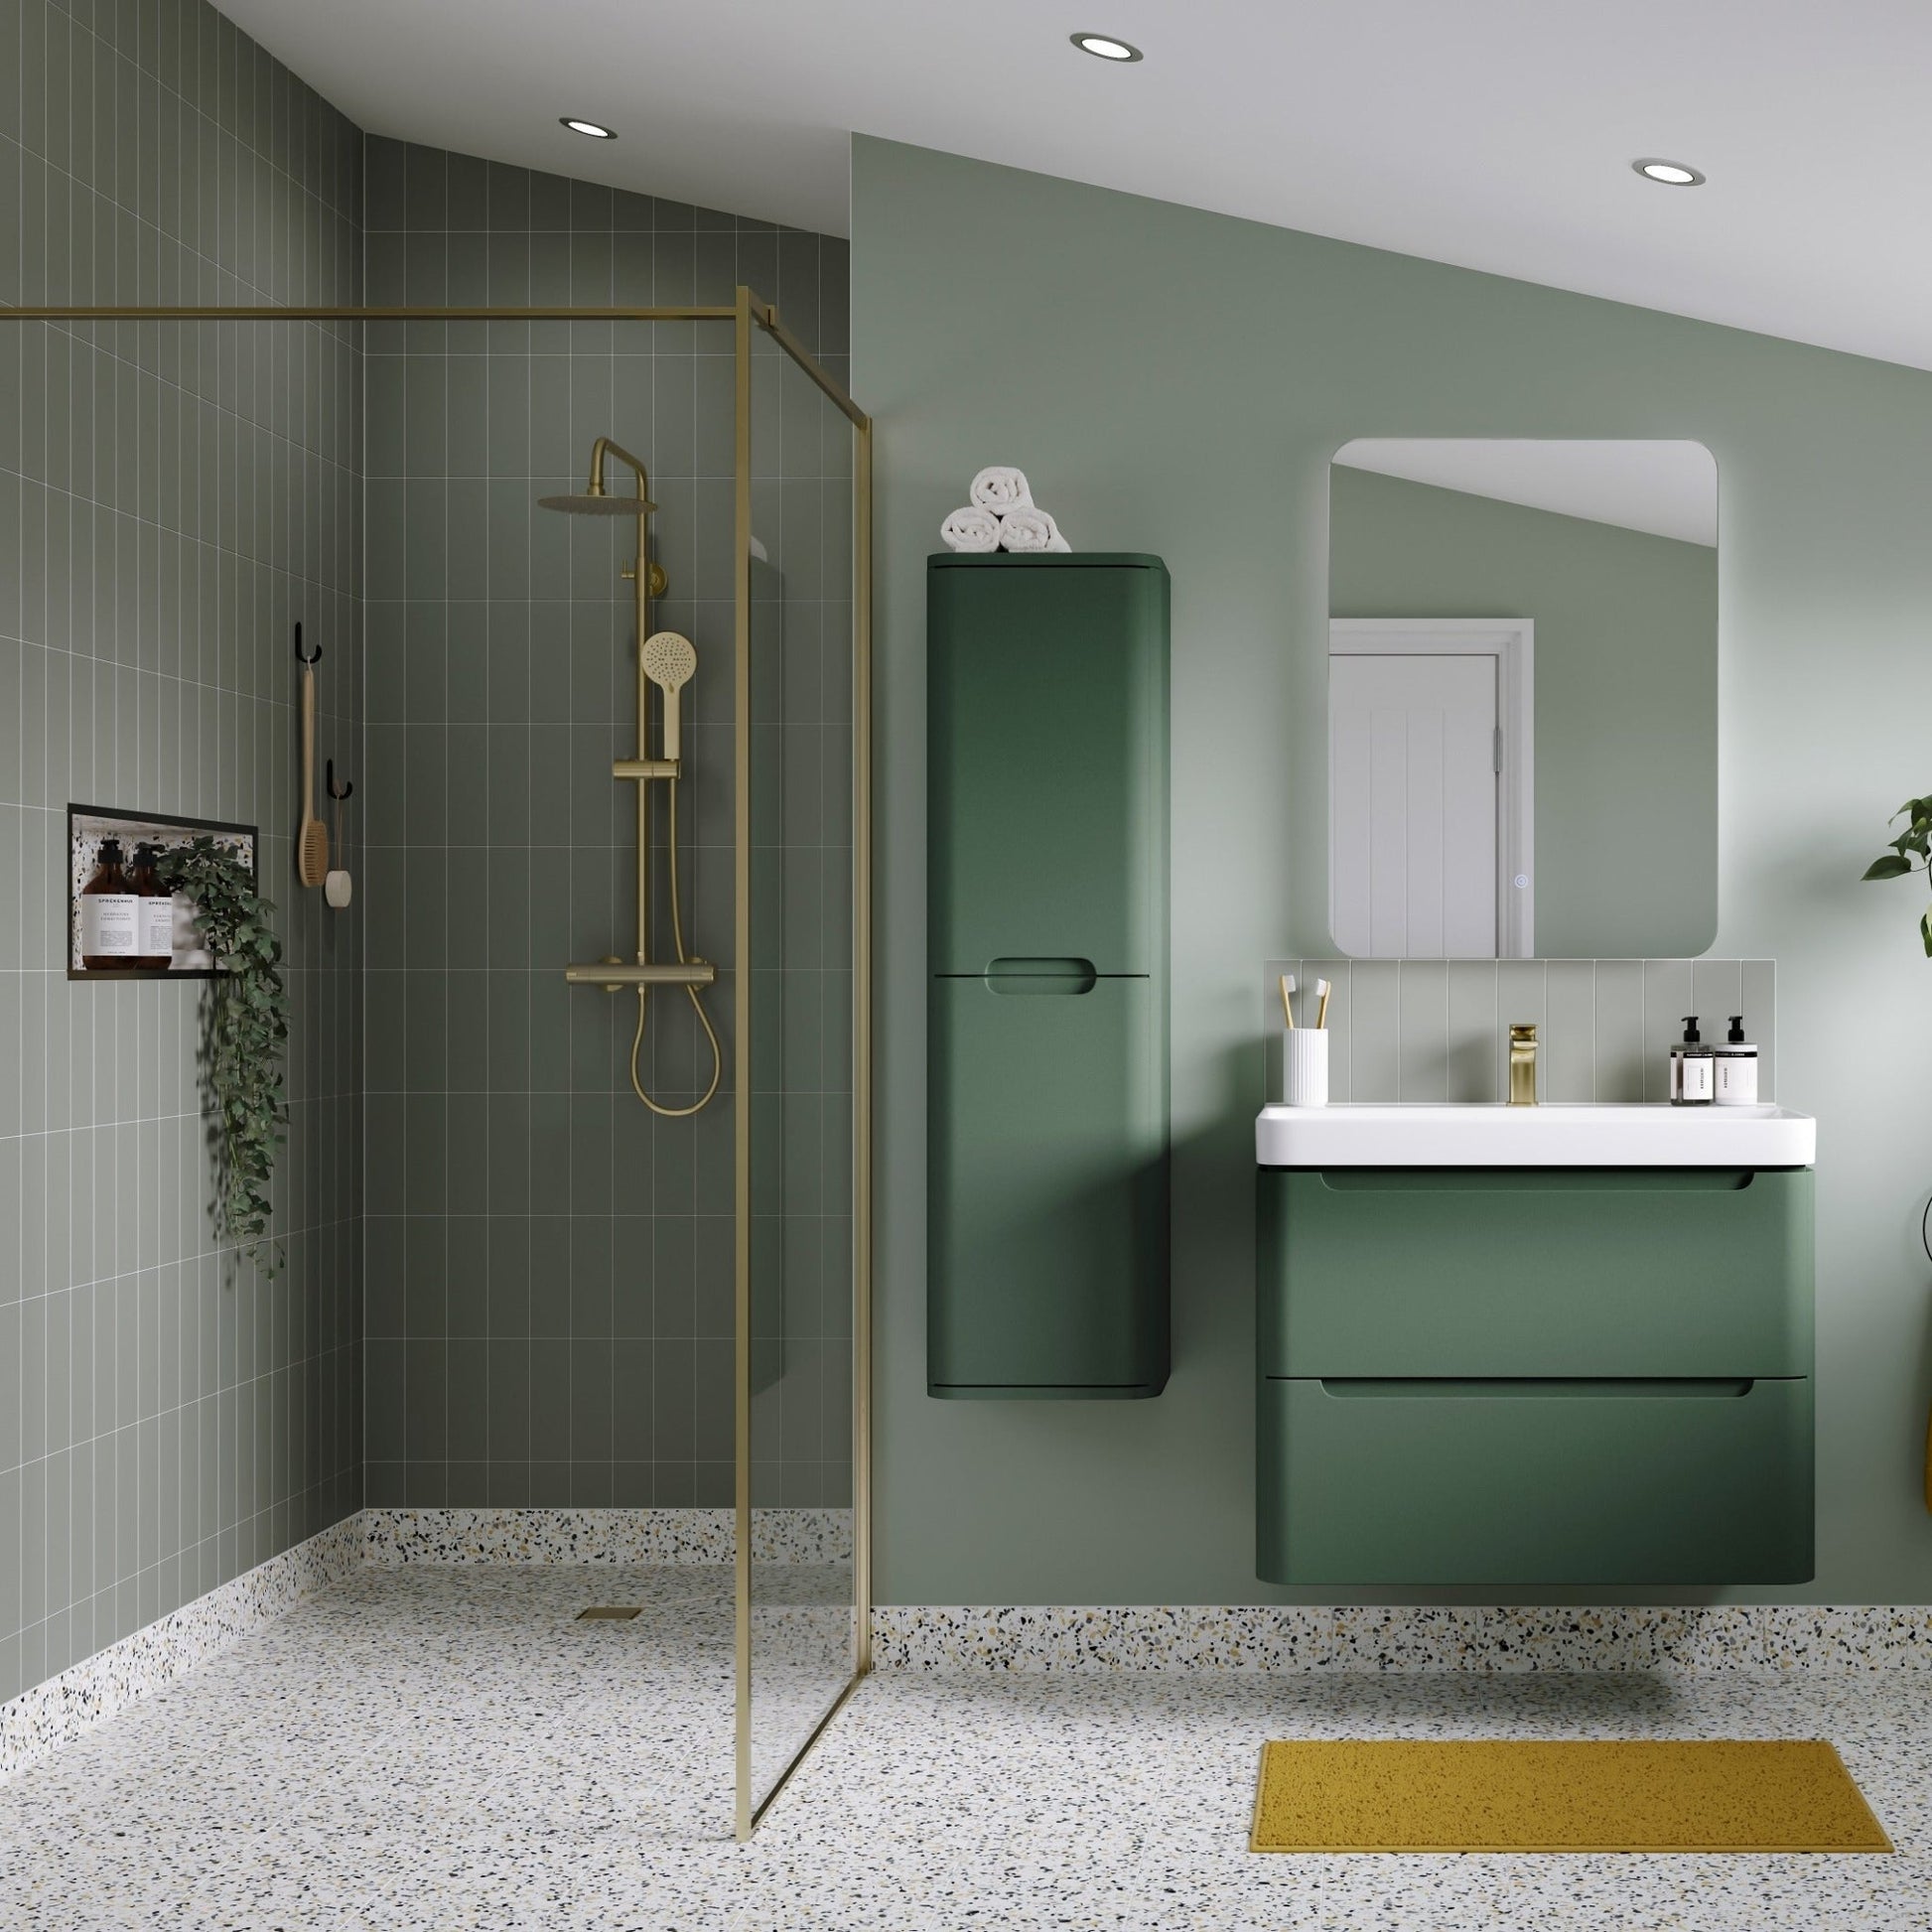 Cool-Touch Thermostatic Bar Mixer Shower & Riser - Brushed Brass - bathandtile